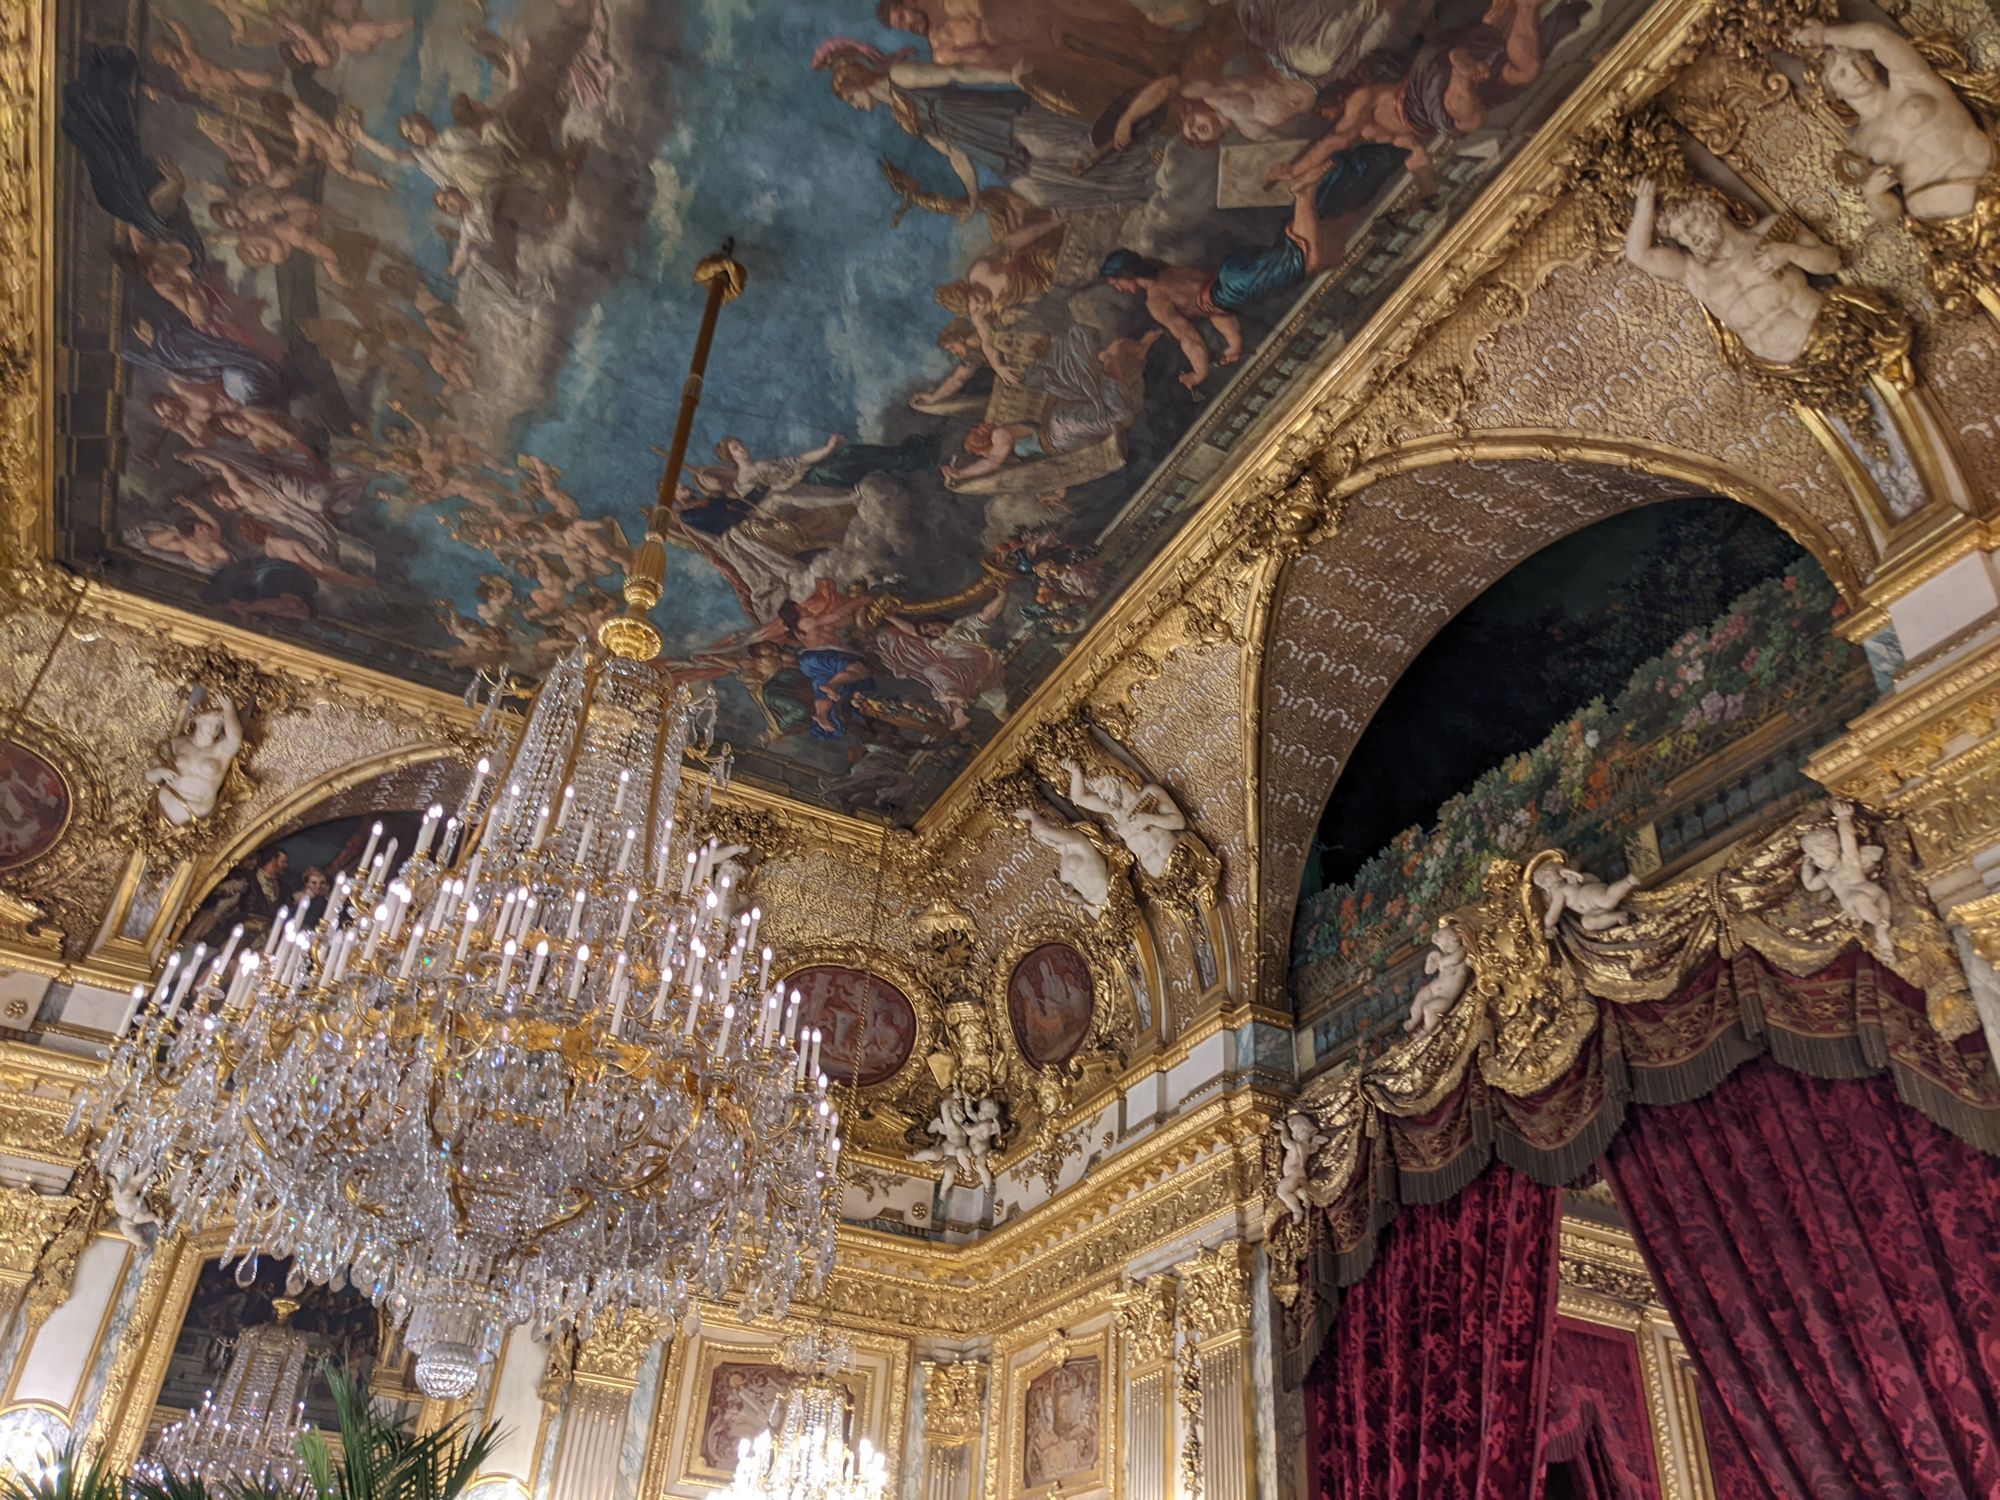 Decorative ceiling art and a chandelier inside the Louvre Museum